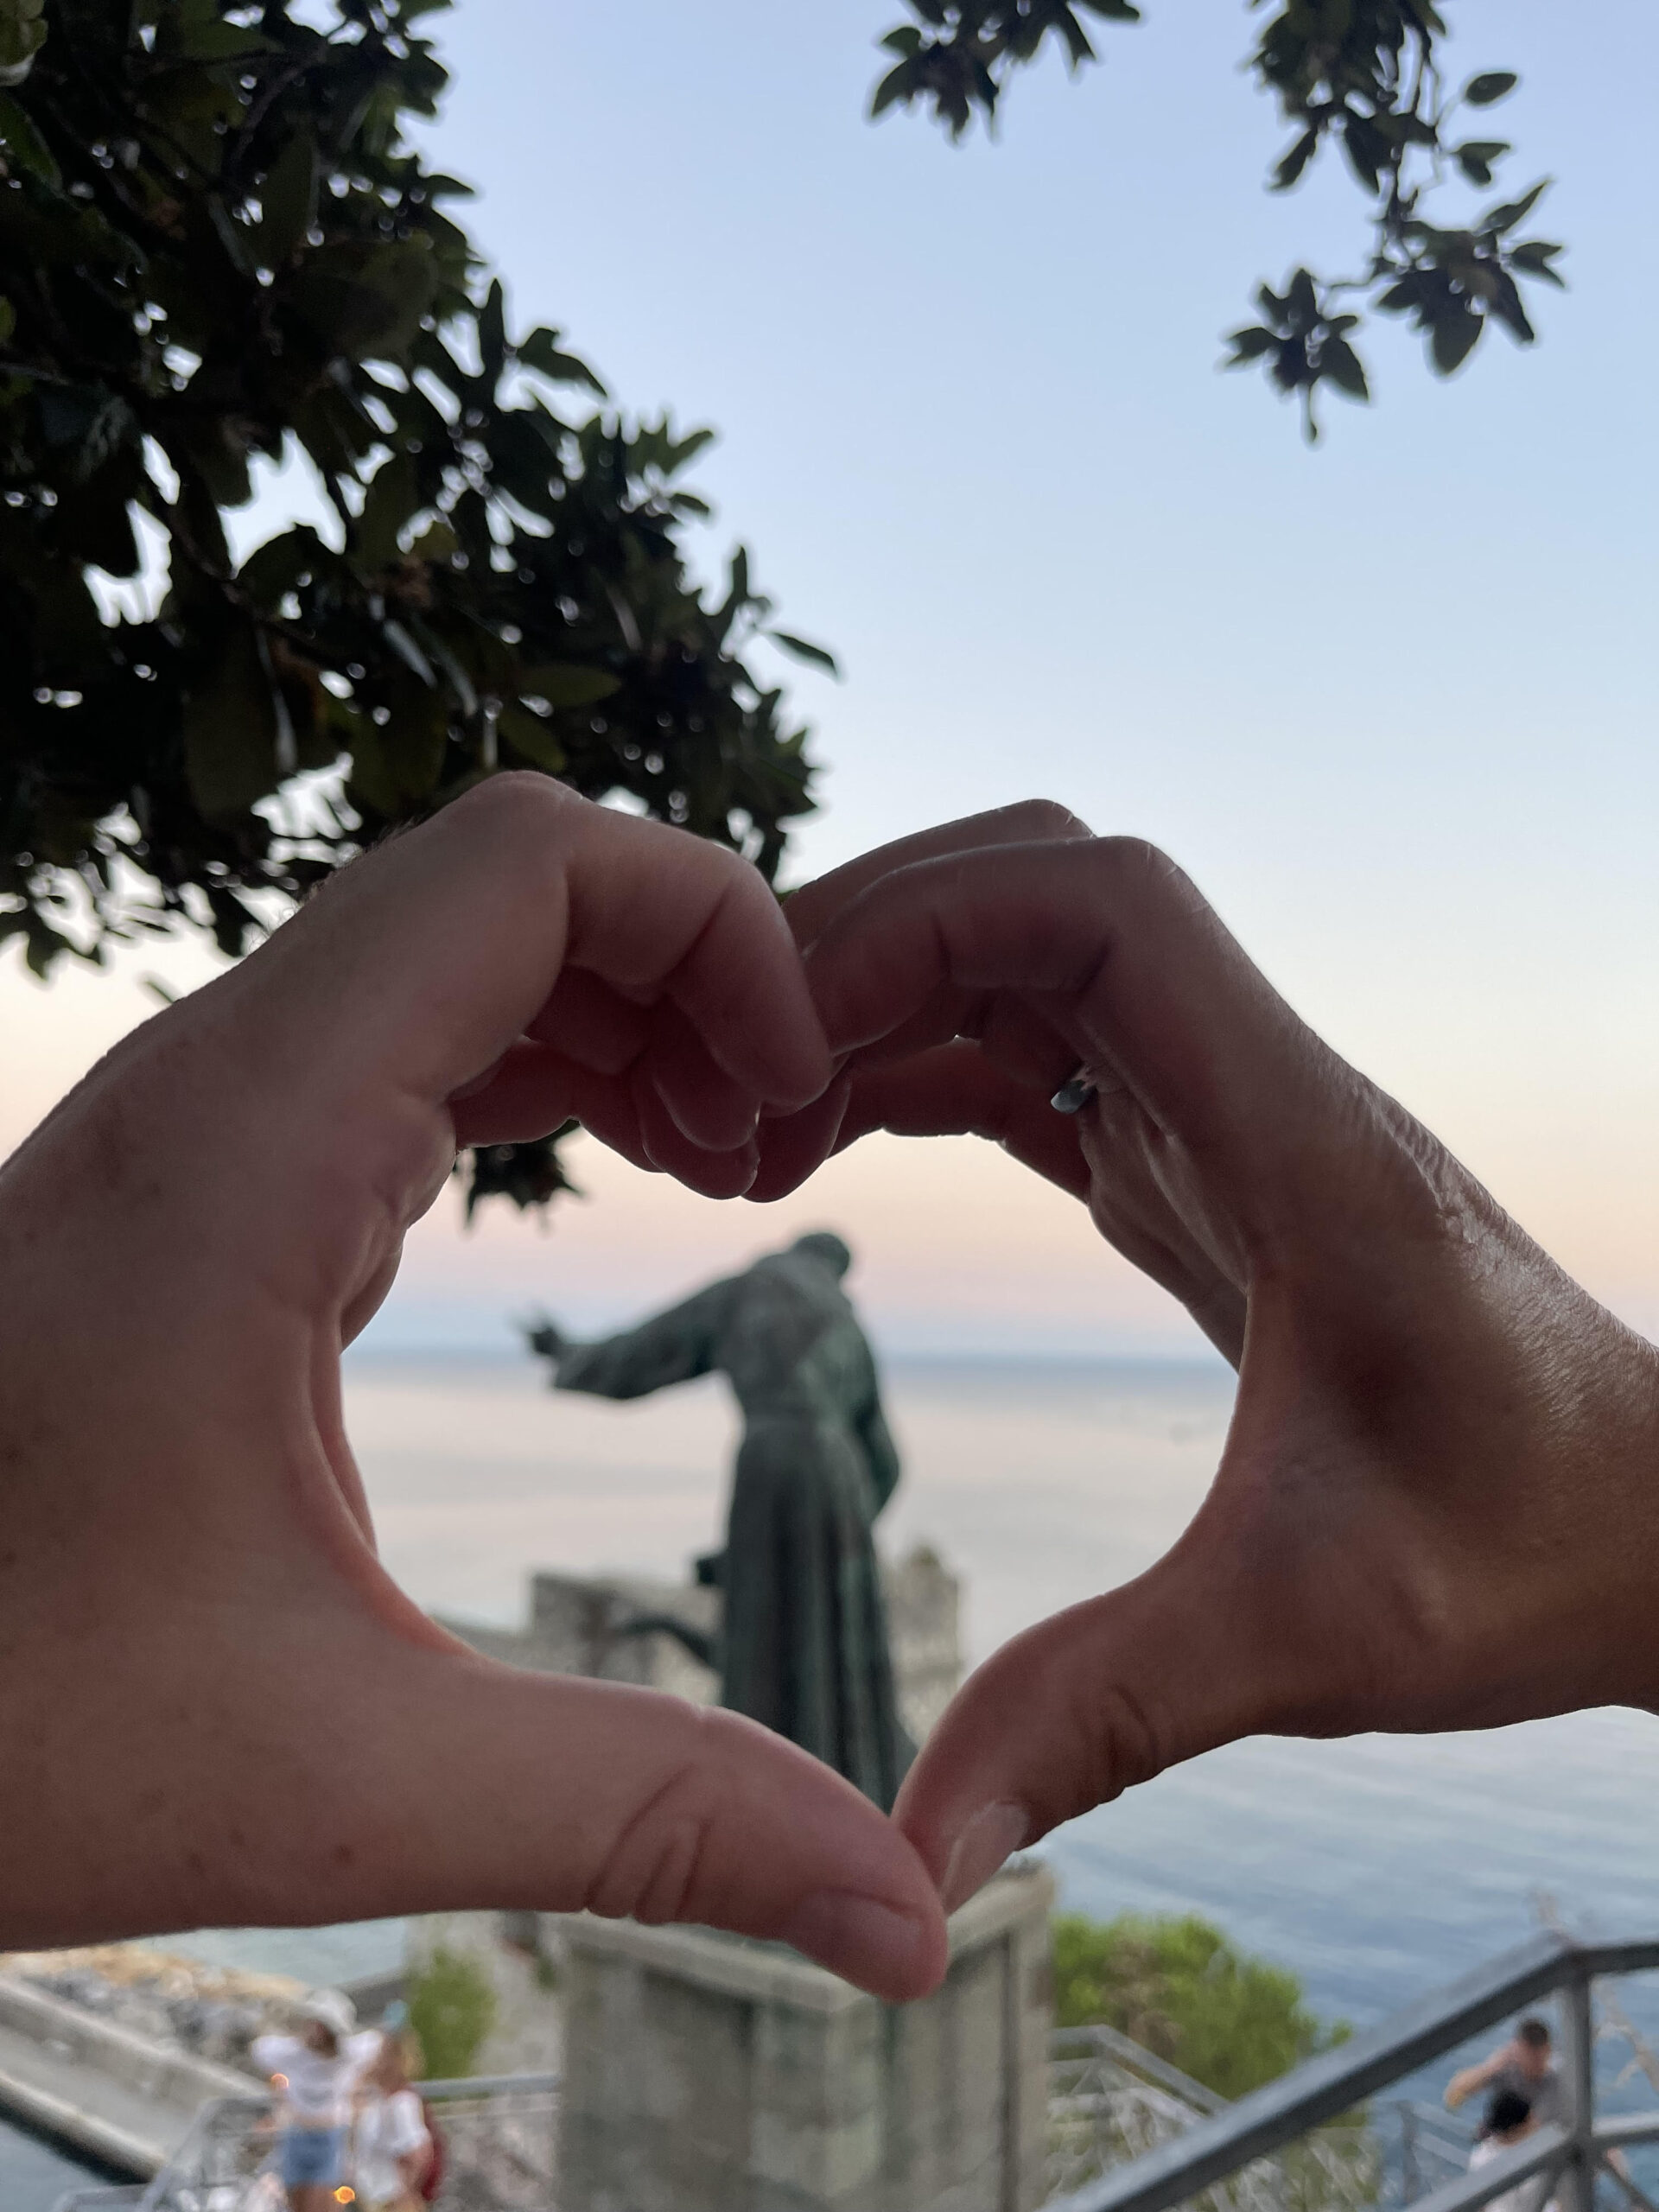 The view atop the monastery where Jordan proposed to Paul, seen through the couples hands making a heart.